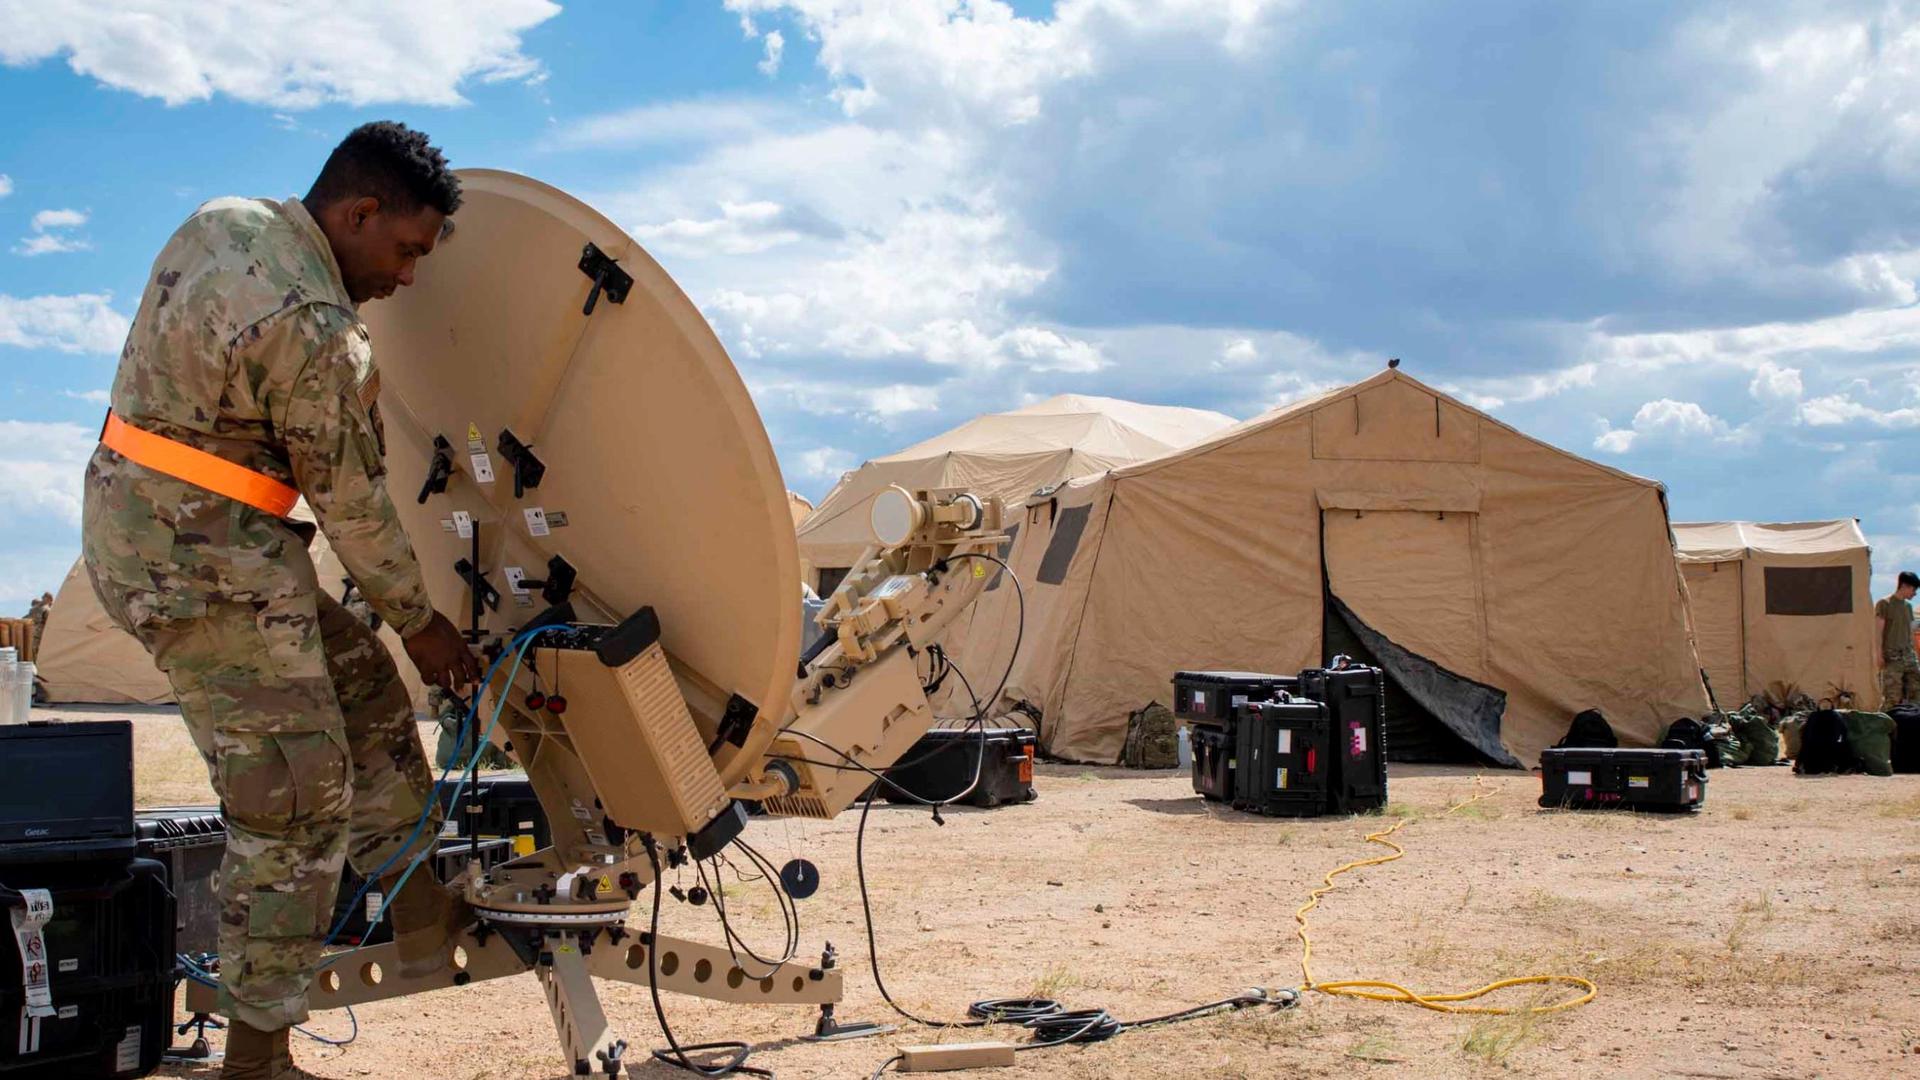 A US Air Force airman sets up a satellite in the Arizona desert during a training exercise in October 2021.